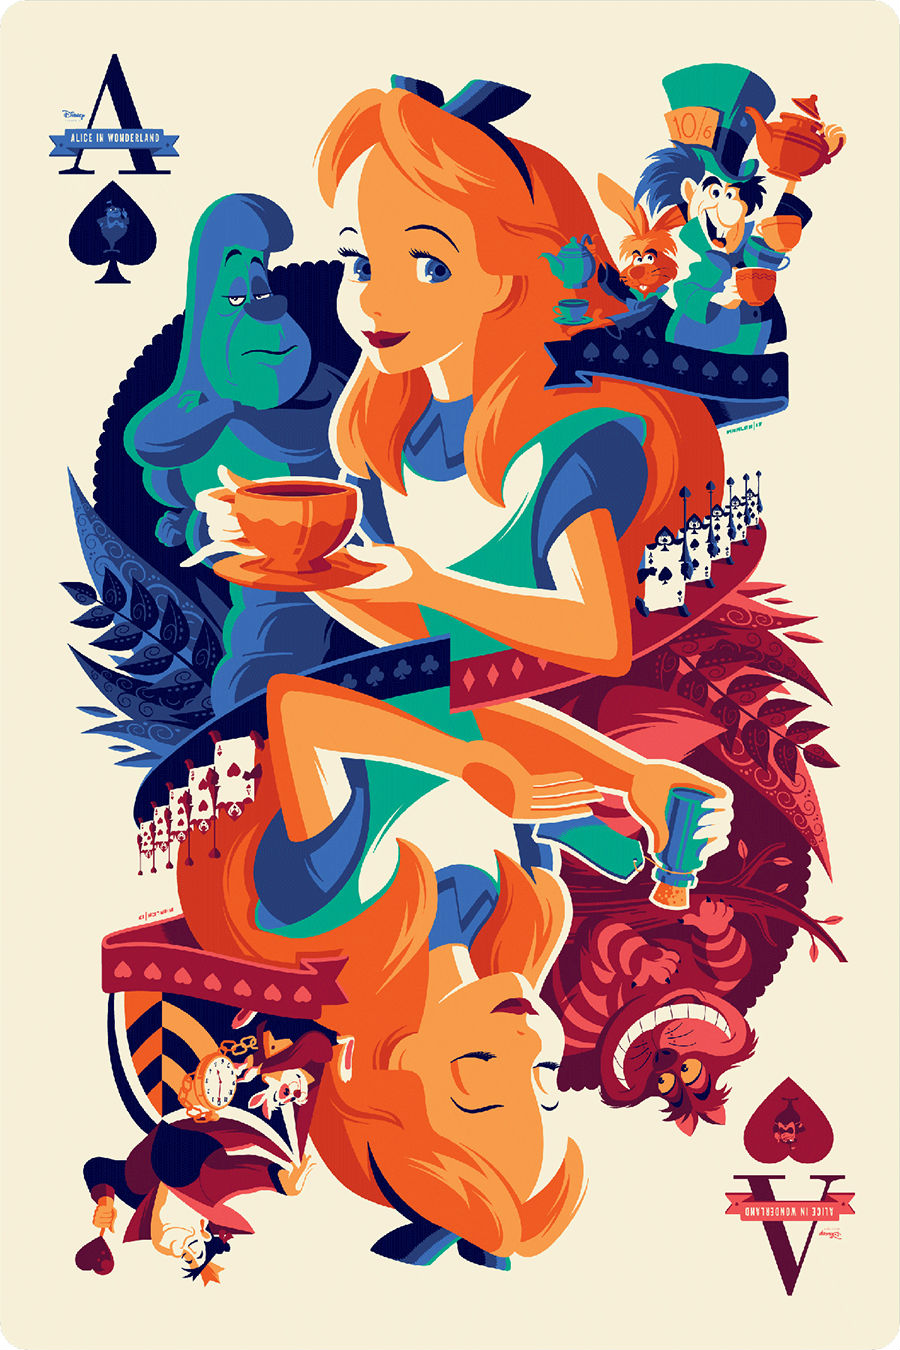 This Beautiful, Classic Disney-Inspired Art Show Is A Time-Warp To Your Childhood